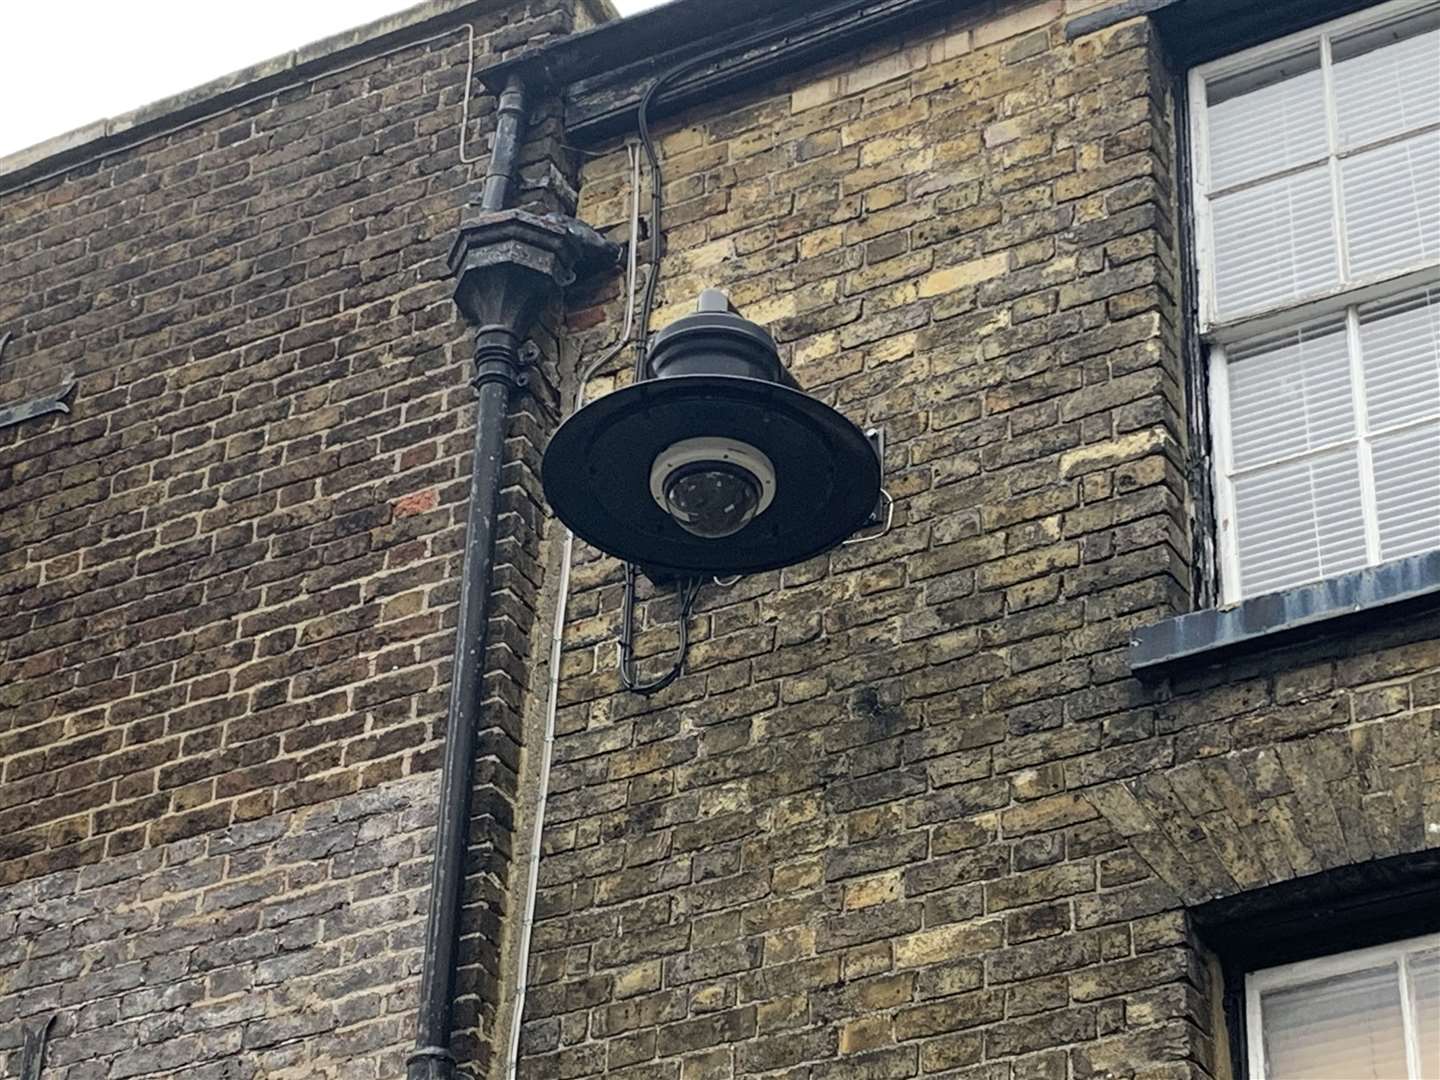 One of the existing CCTV cameras in Market Street, Sandwich